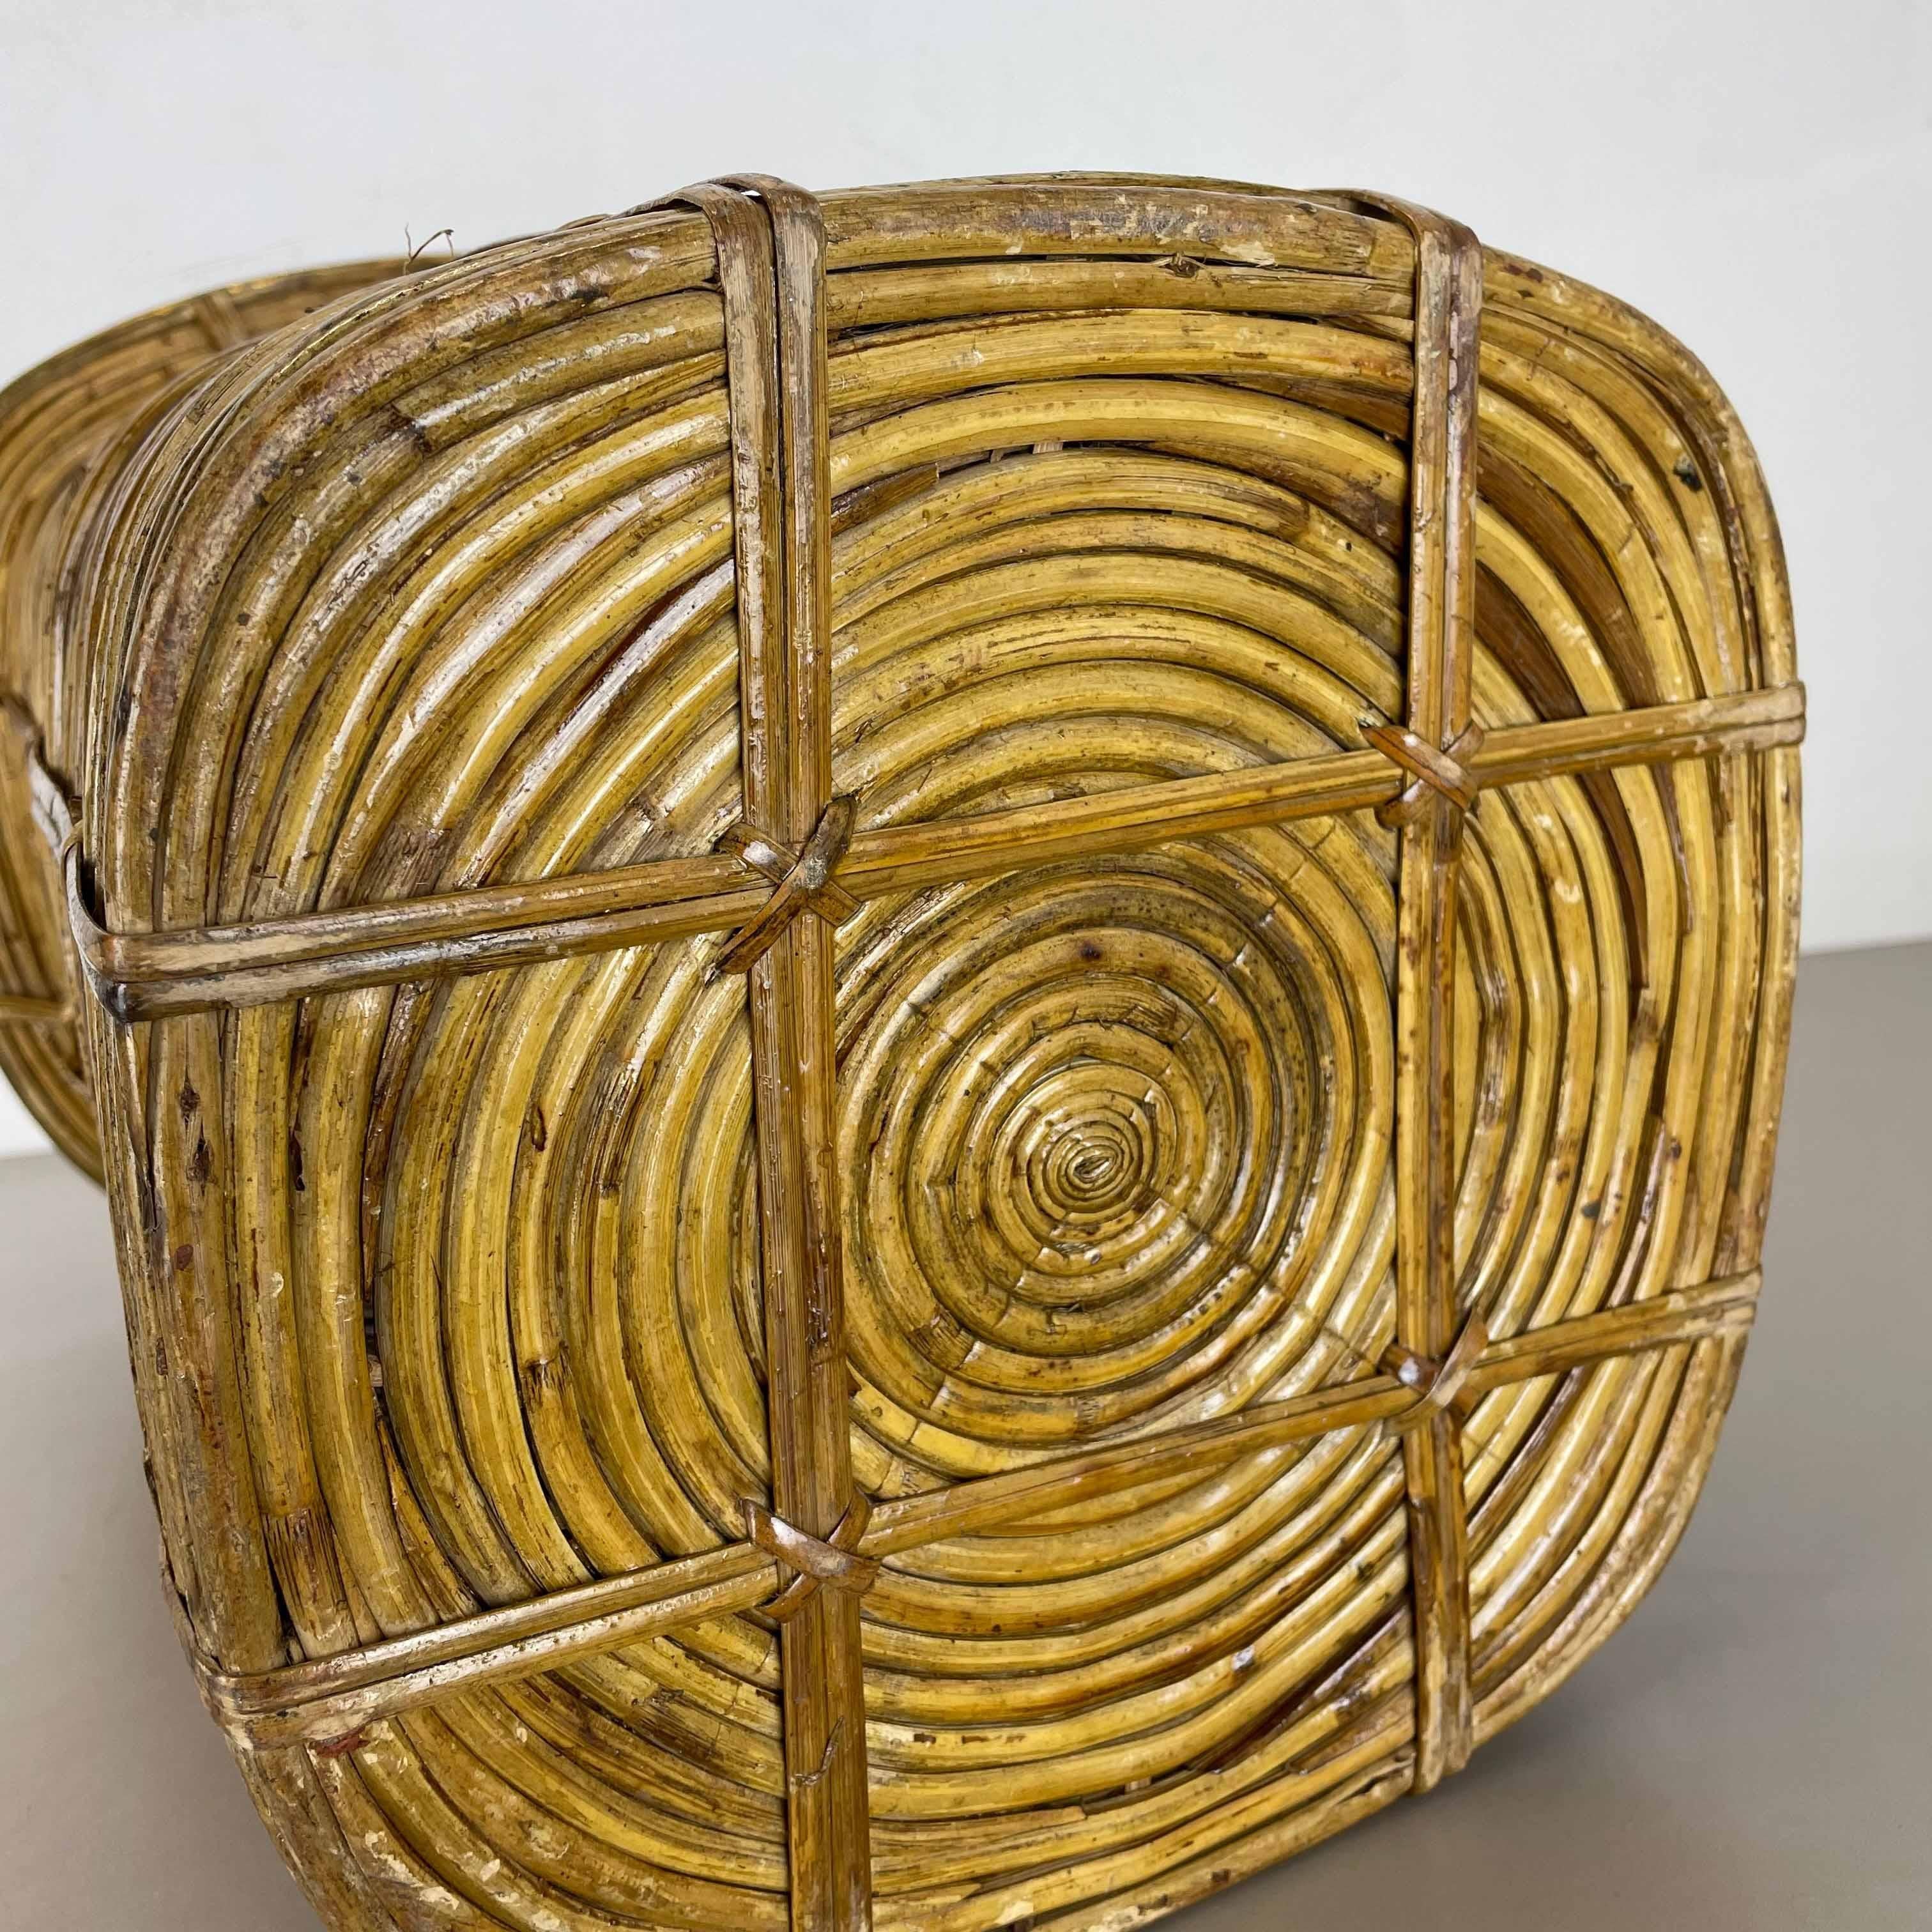 Aubock Style Rattan and Brass Bauhaus Waste Bin, Umbrella Stand, France, 1960s For Sale 14